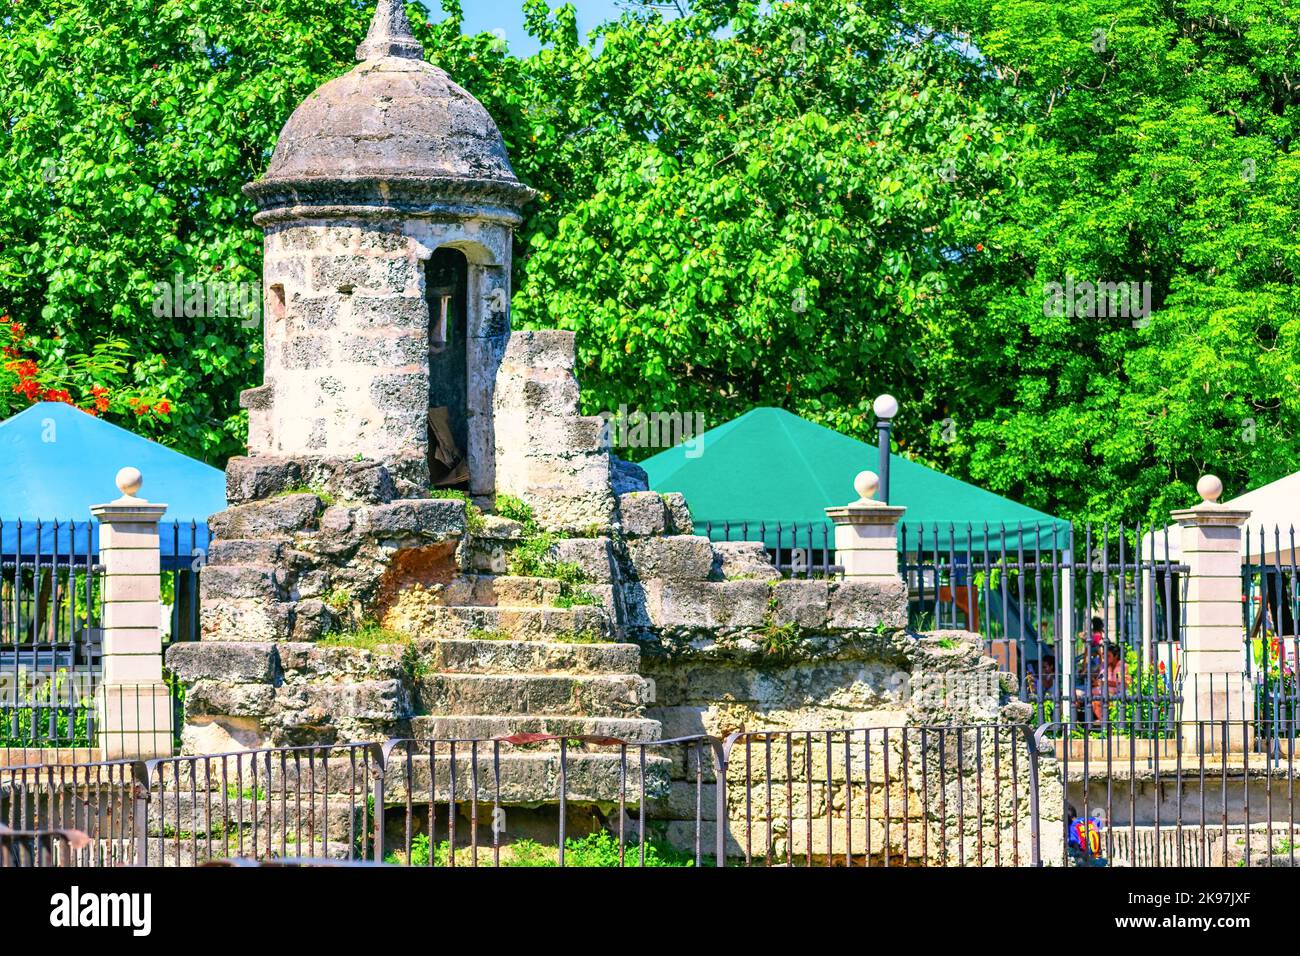 Ruins of an old Spanish colonial fort or fortified wall in Old Havana. Stock Photo